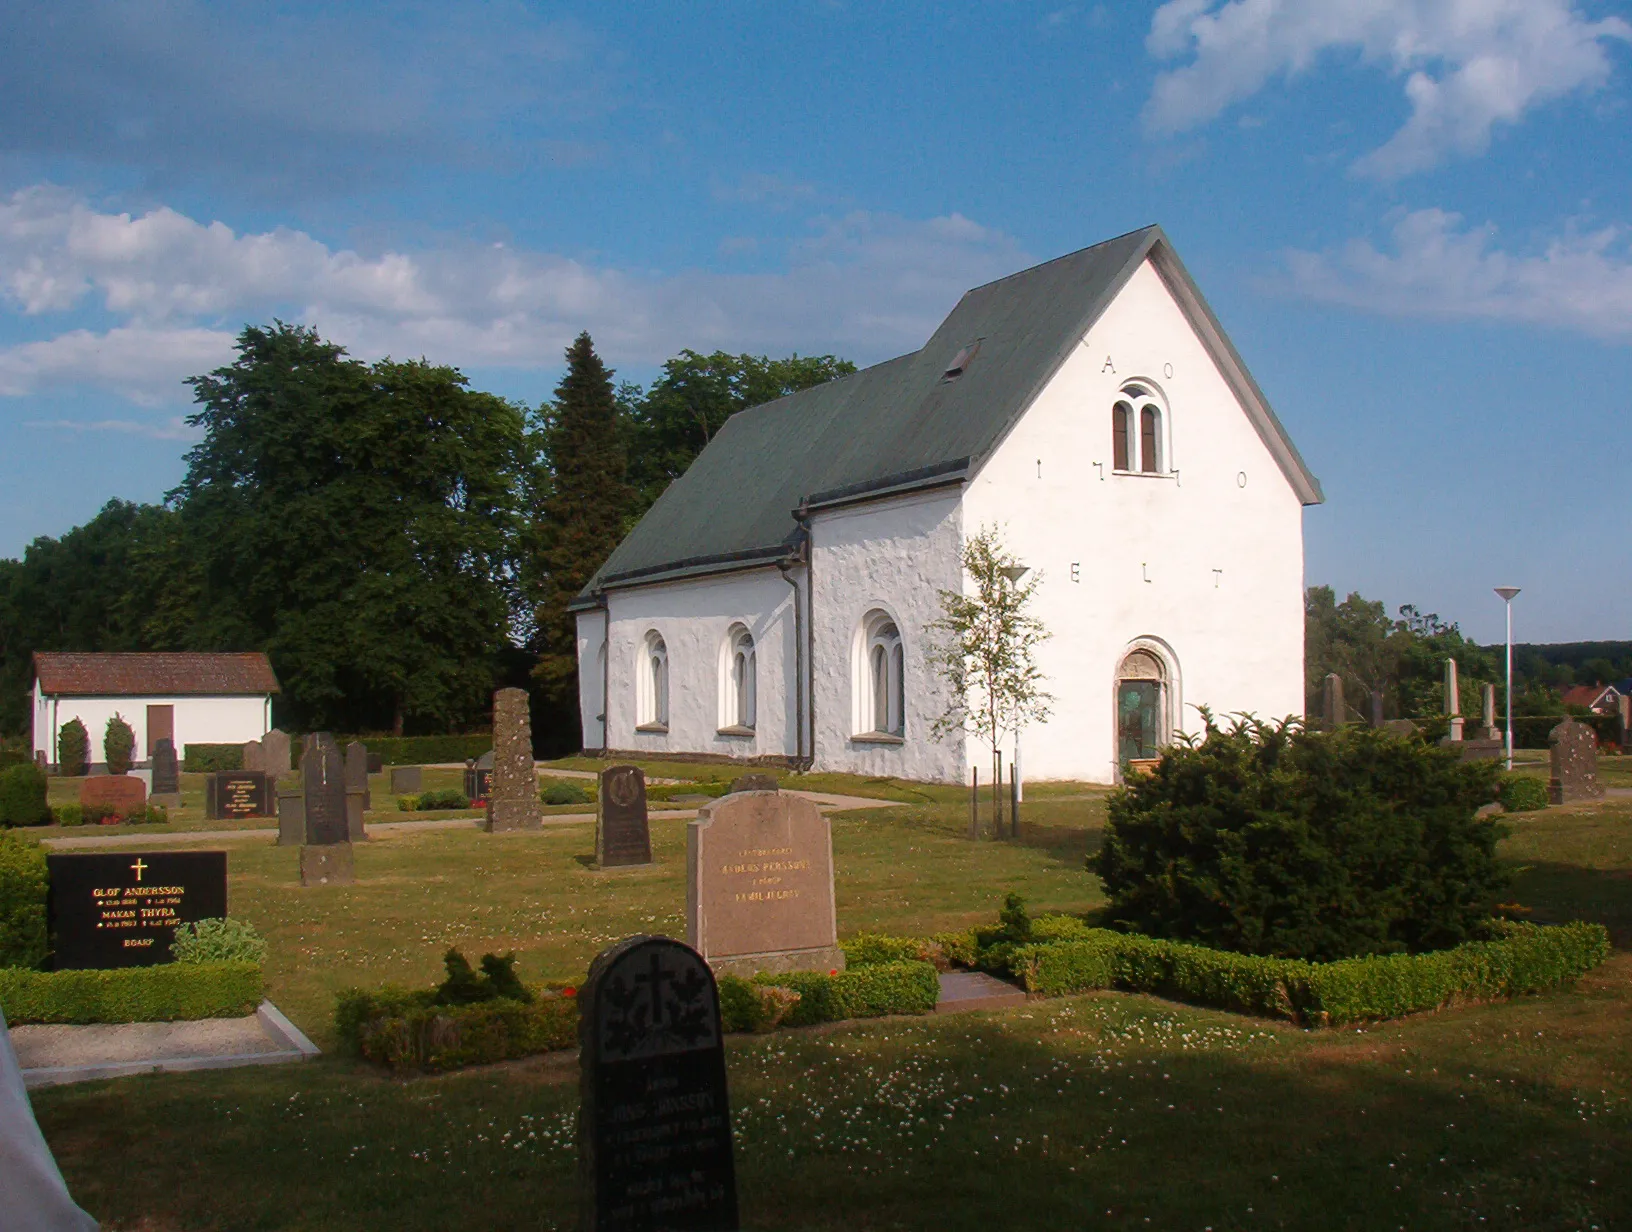 Photo showing: Church in Sweden, in Skåne, in the municipality of sv:Kristianstad.
This tower-less church was built in the midth 12 century. Inside it are paintings by Anders Johansson from 1498.